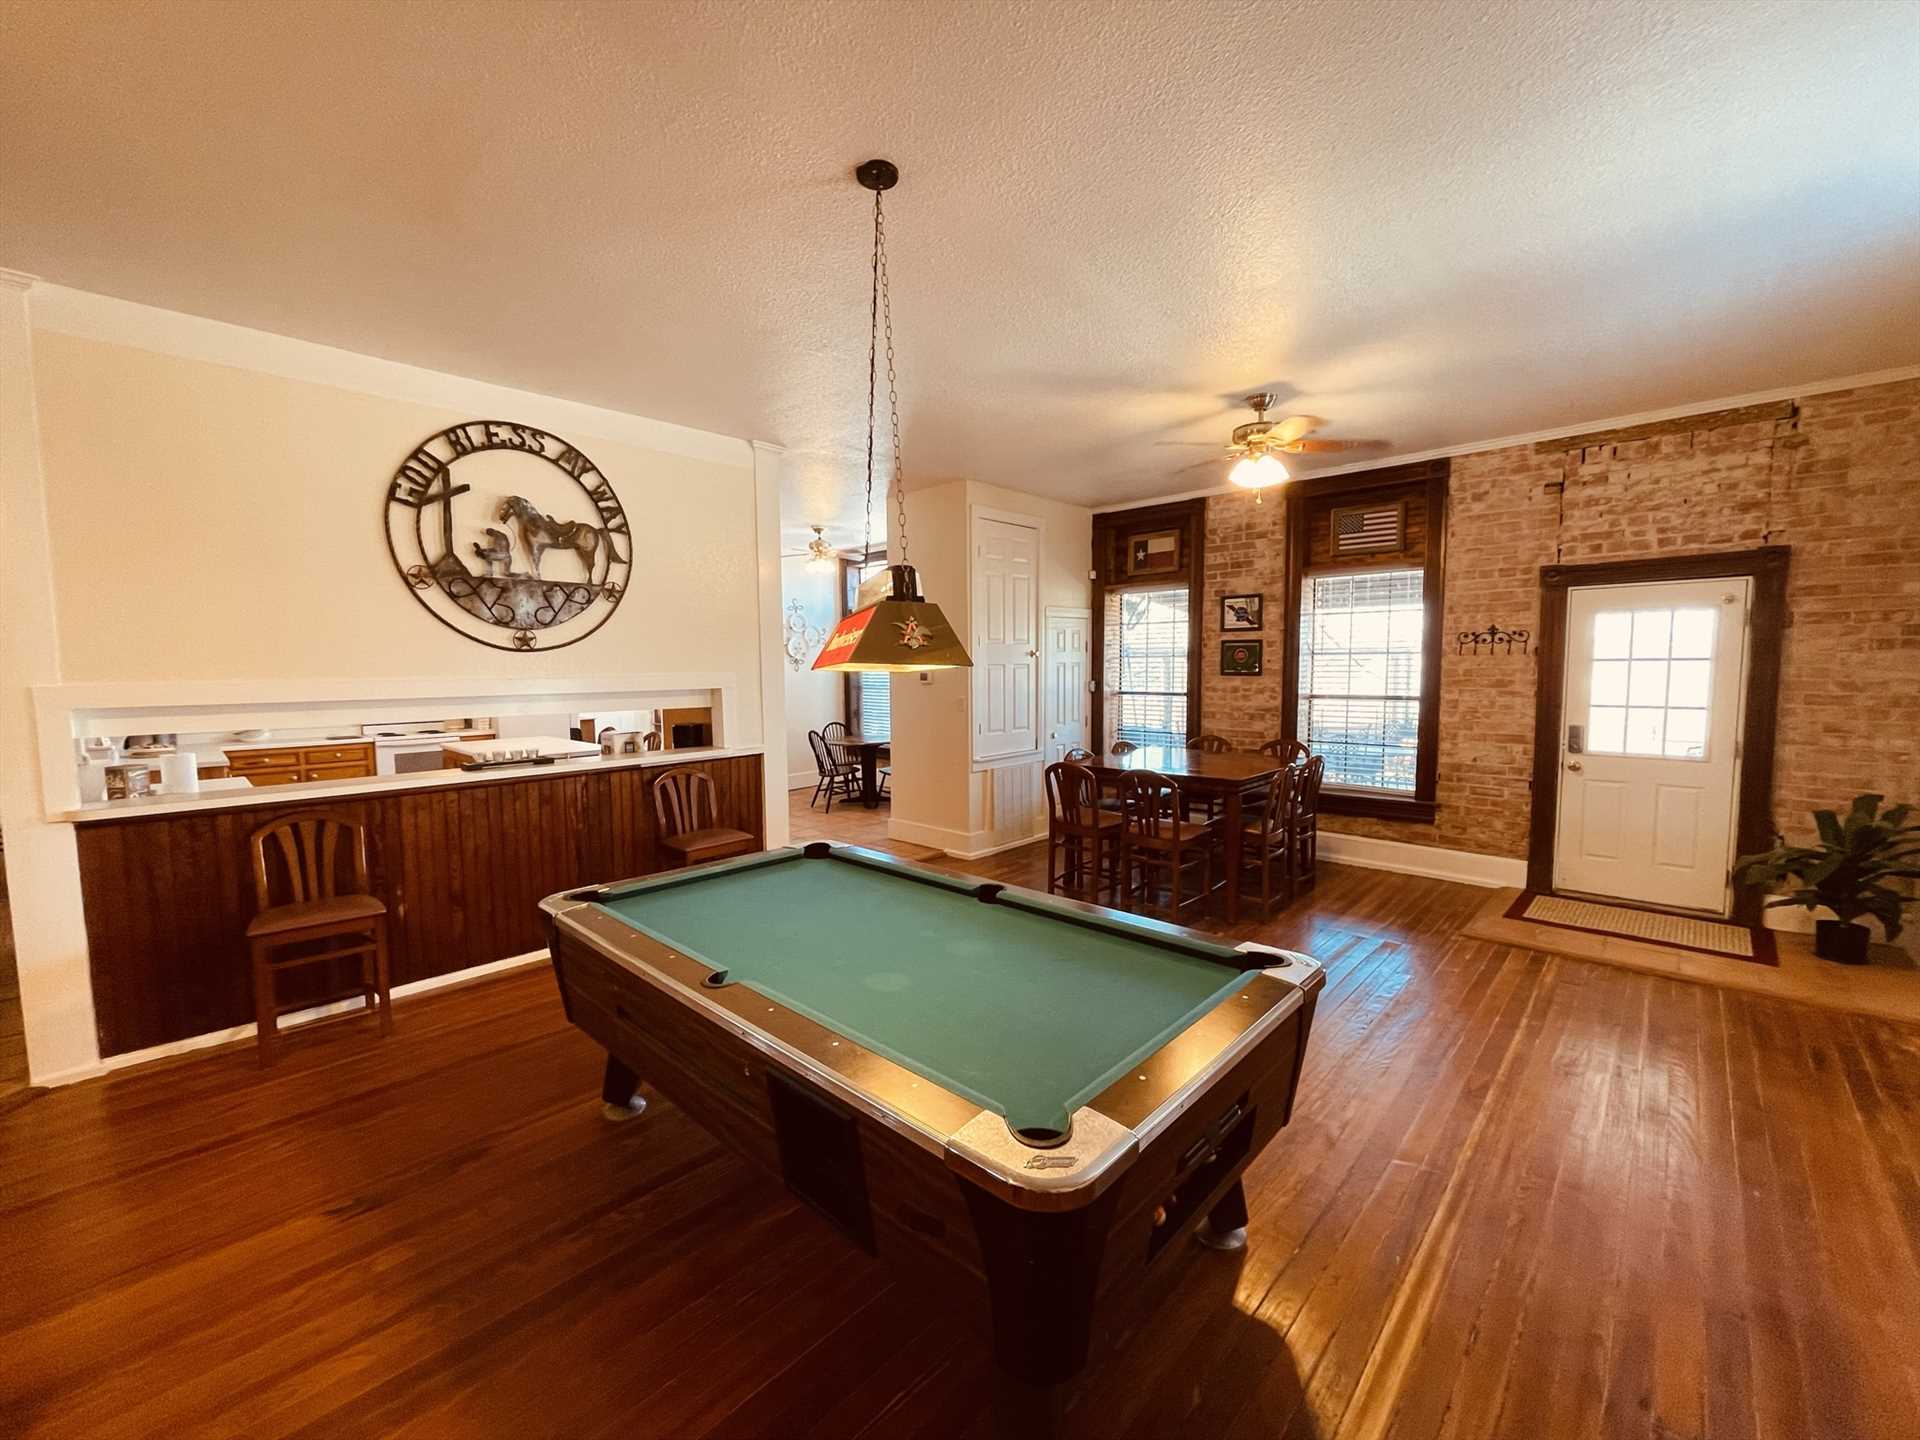                                                 Nearby bar seating provides a comfortable space to relax between shots while you enjoy the pool table.